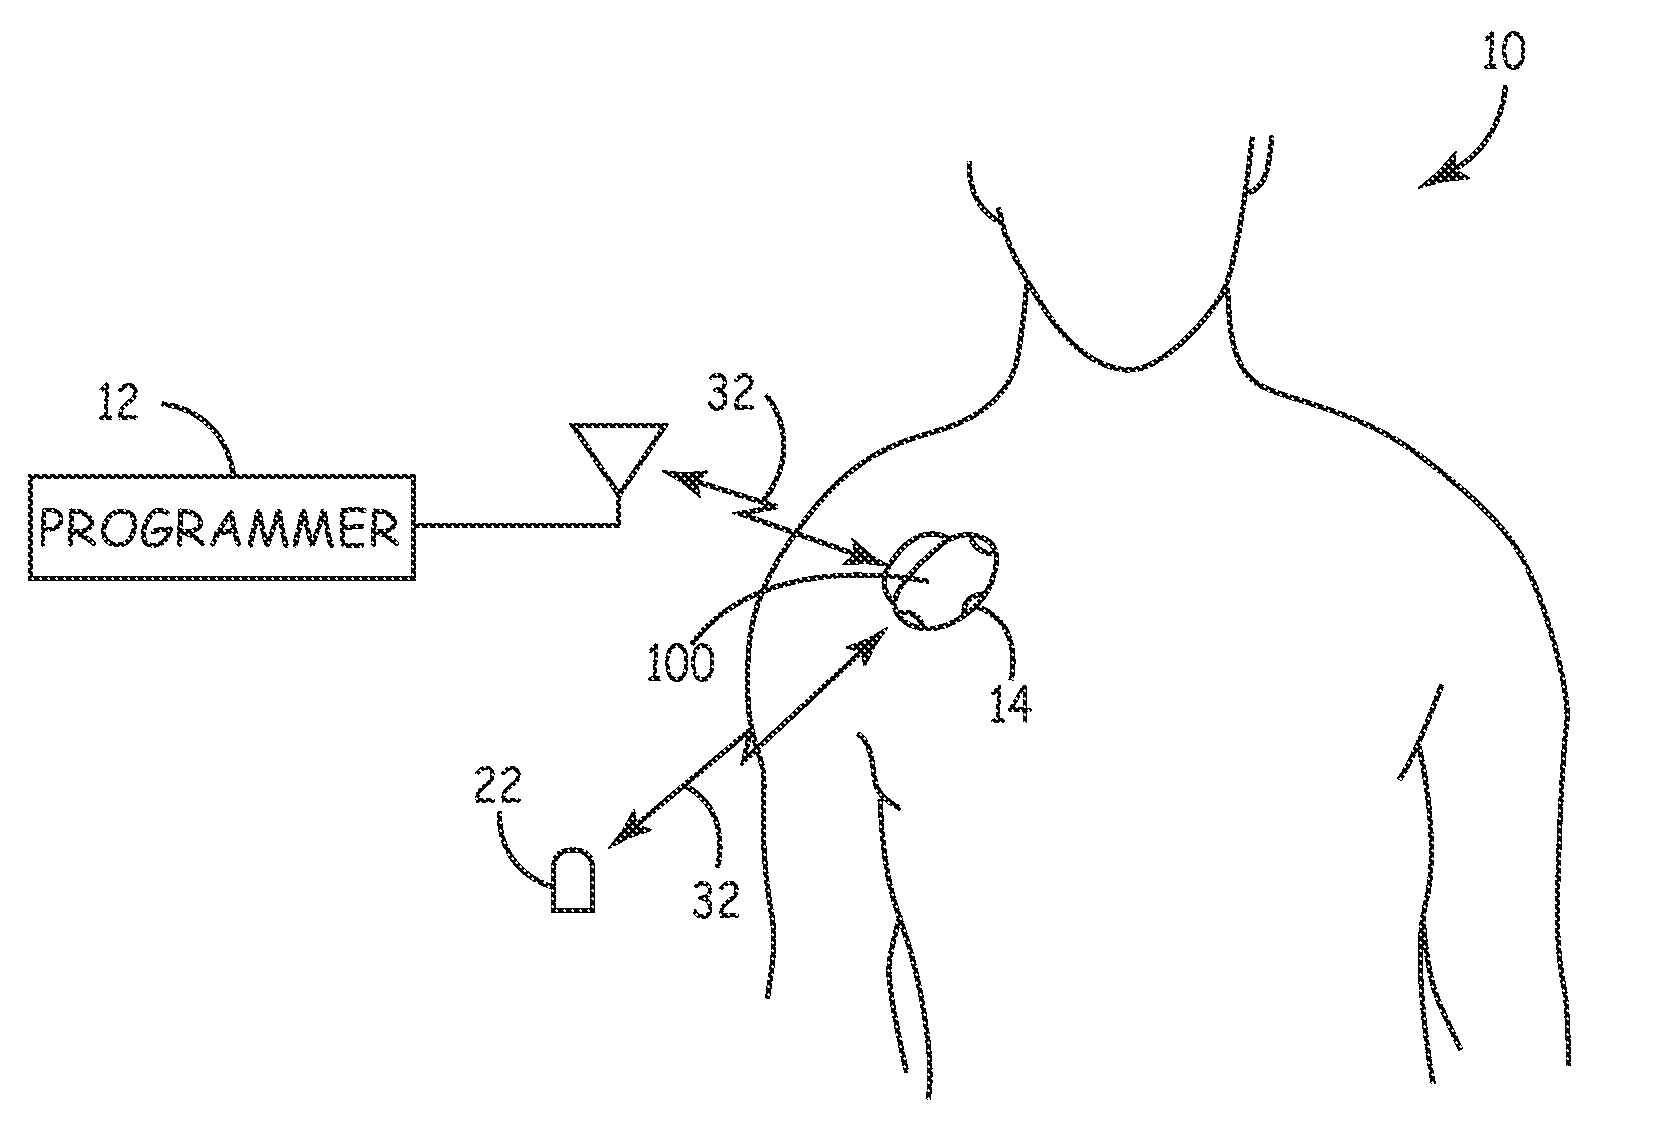 System and method for using cardiac events to trigger therapy for treating nervous system disorders